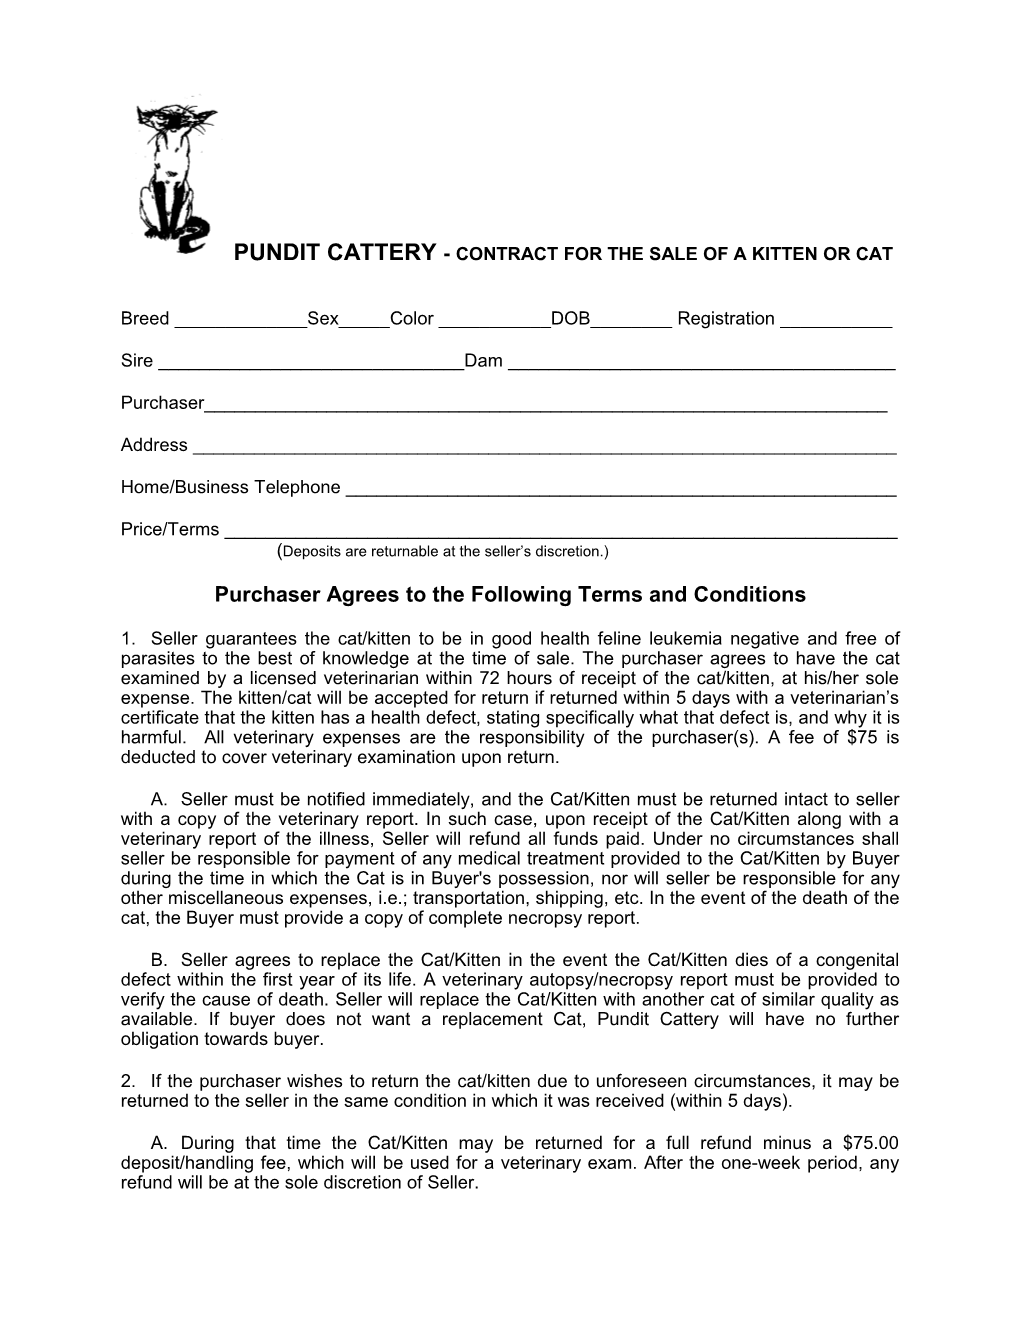 Legal Sales Contract